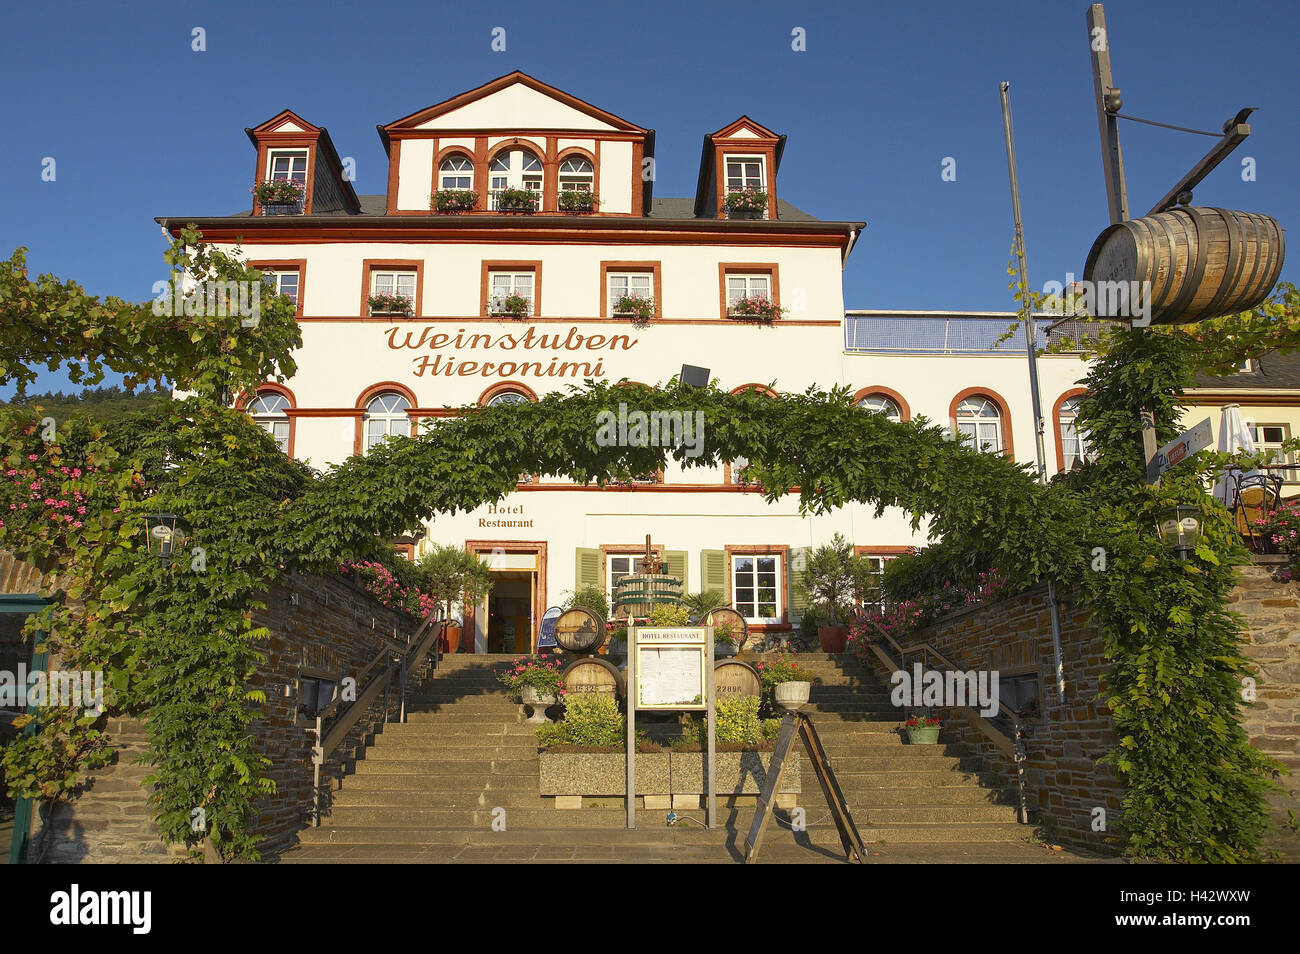 Germany, Rhineland-Palatinate, Cochem, Old Town, 'Weinstuben Hieronimi', stairs, Moselle valley, wine region, wine-growing area, tourism, destination, place of interest, building, architecture, house, facade, bar, gastronomy, Weinschänke, wine casks, bows, covered, climbing plant, wine, outside, sunny, deserted, Stock Photo